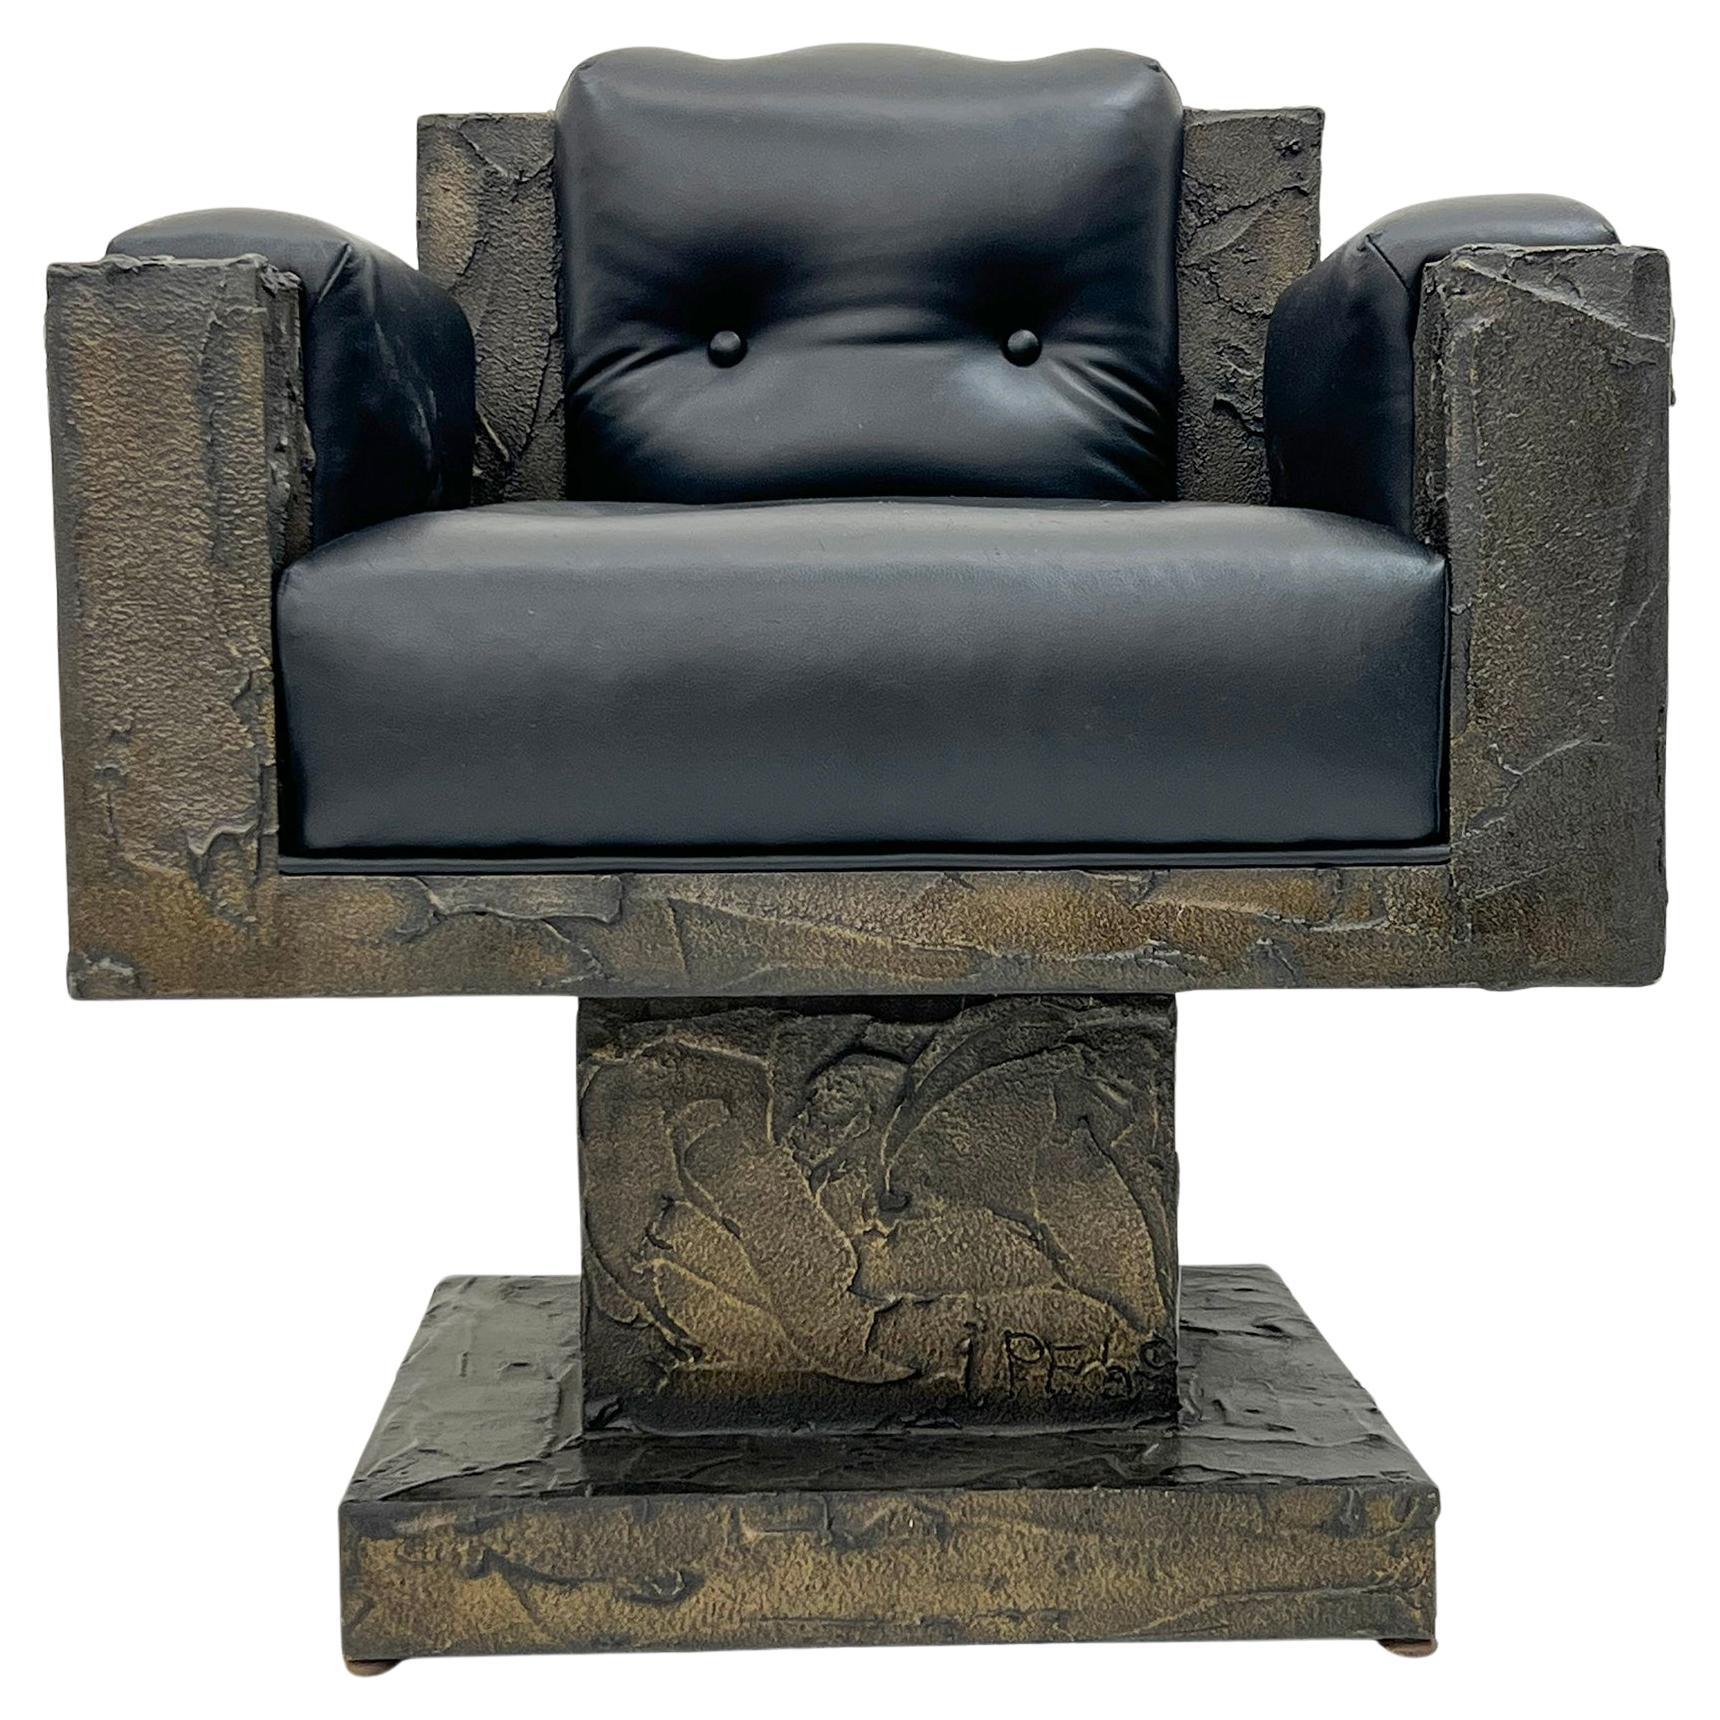 Early Paul Evans Sculpted Bronze Throne Chair, Signed and Dated, 1969